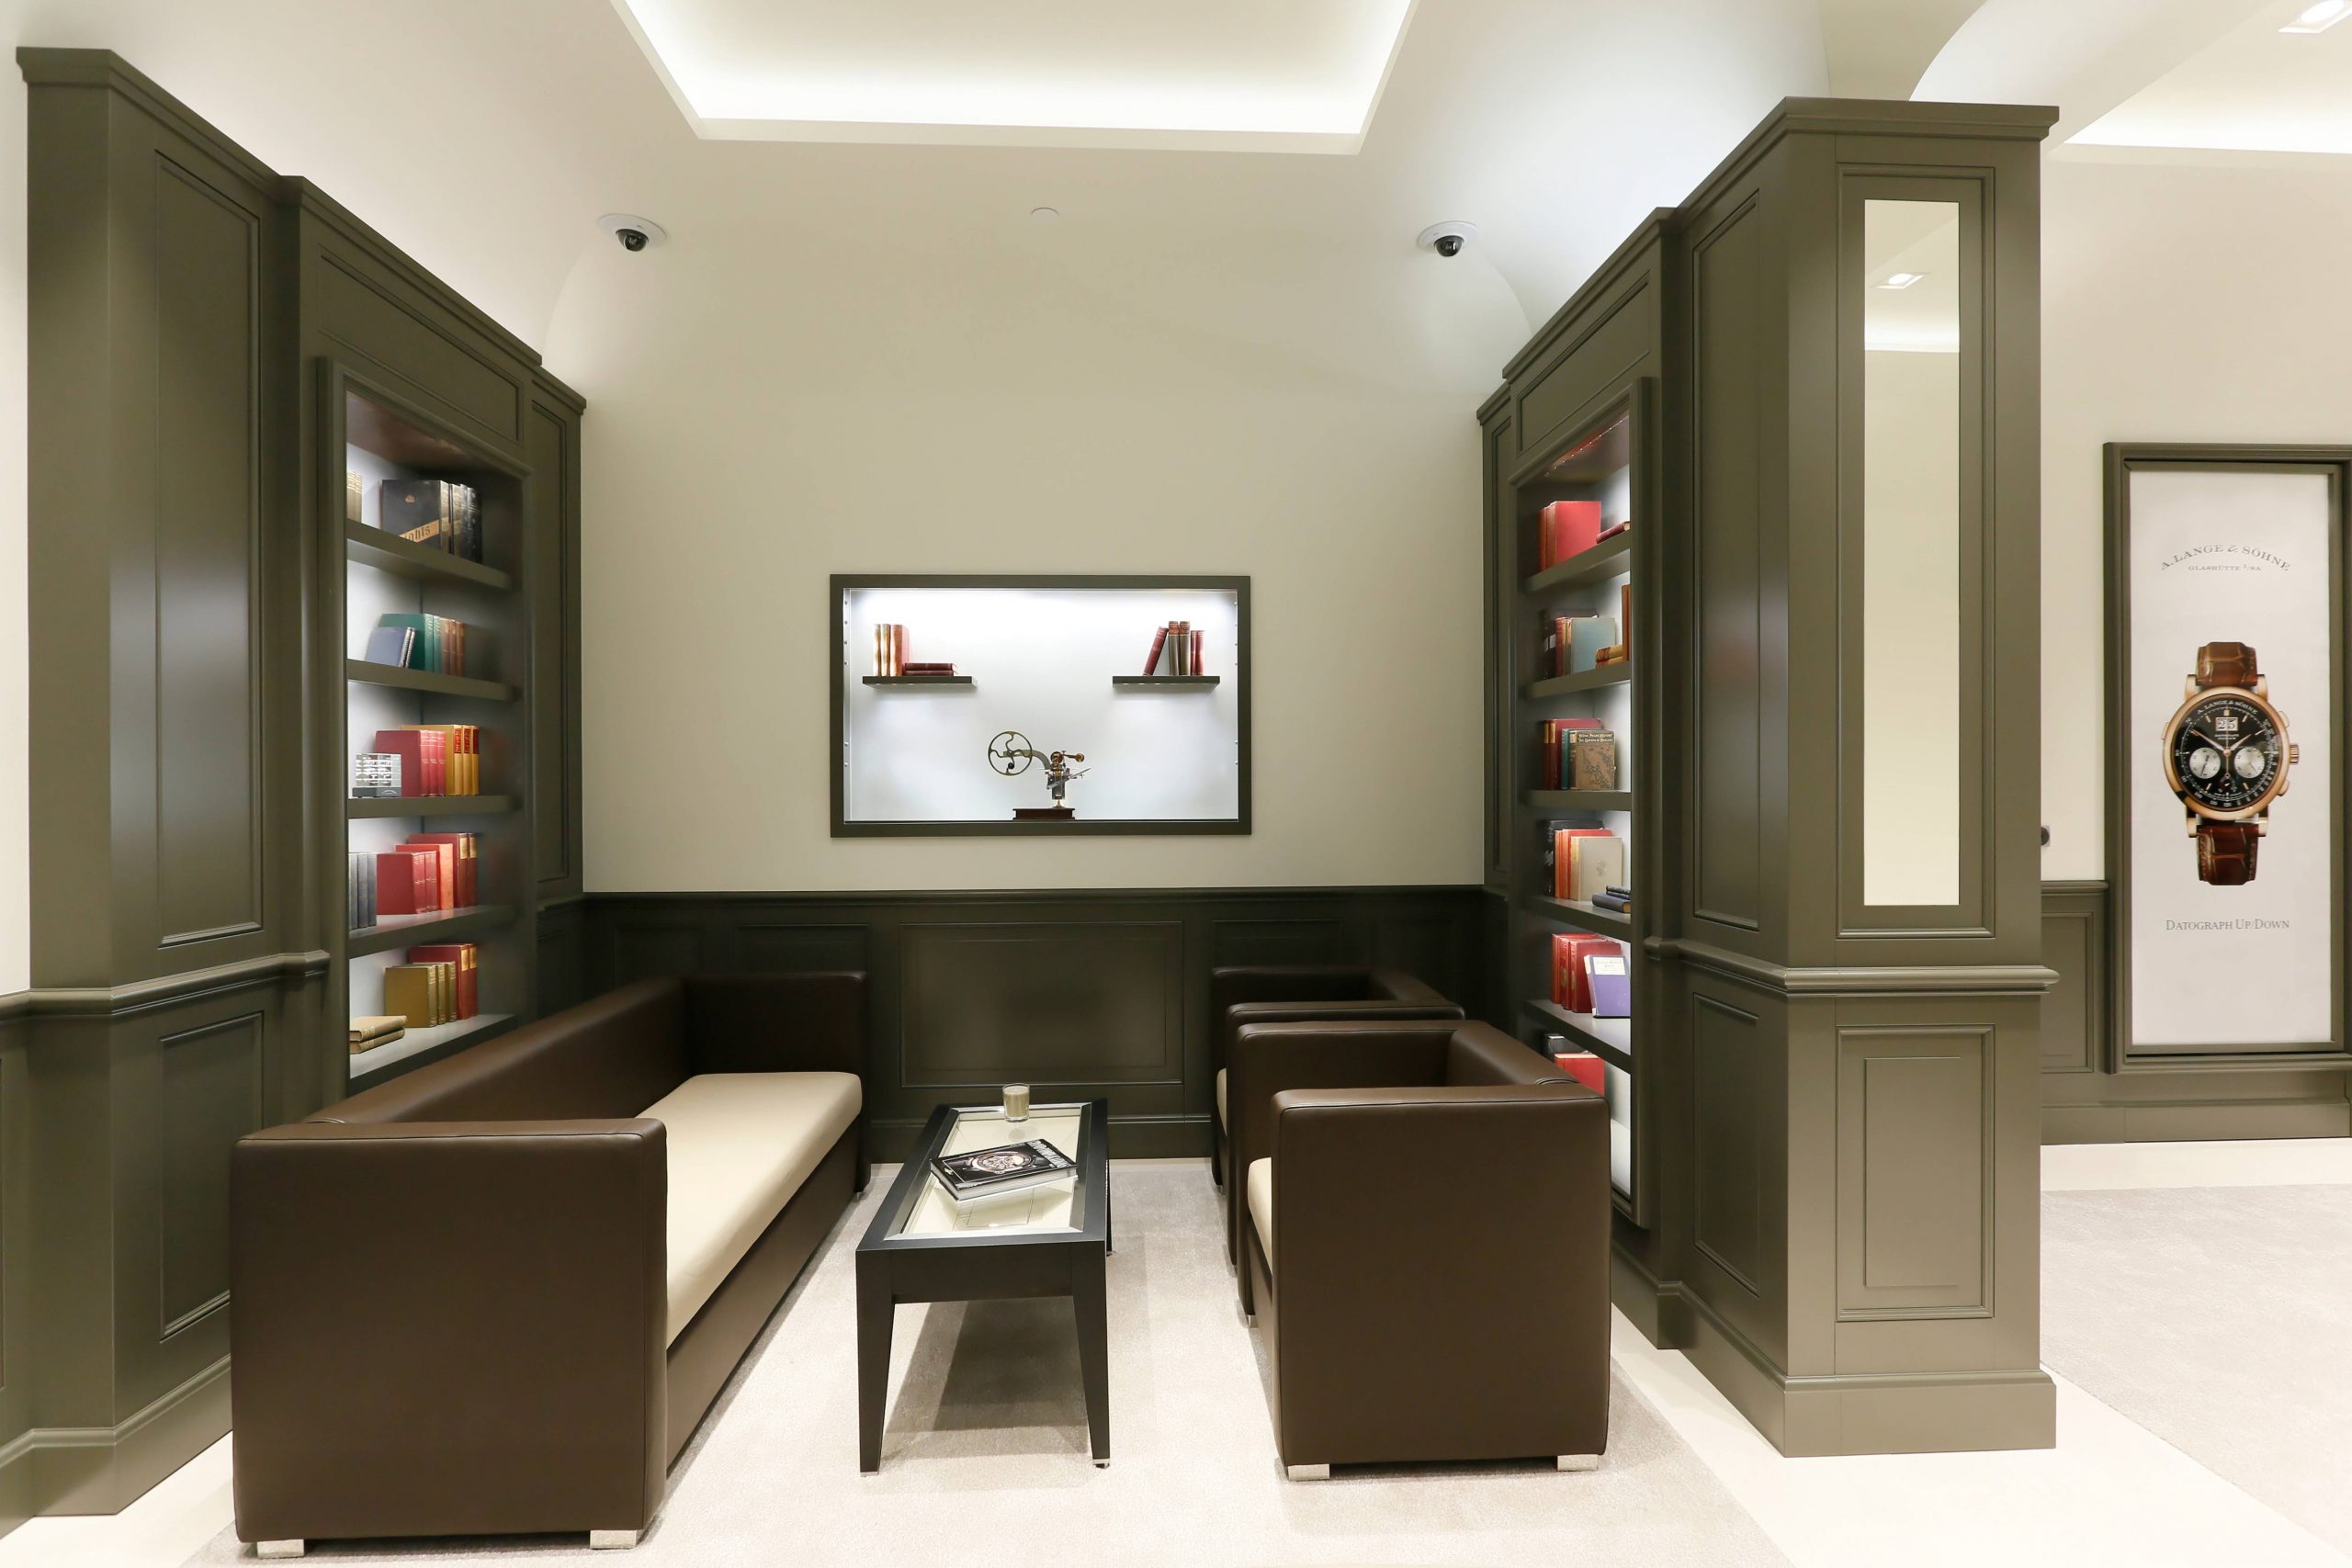 The A. Lange & Sohne Boutique at South Coast Plaza